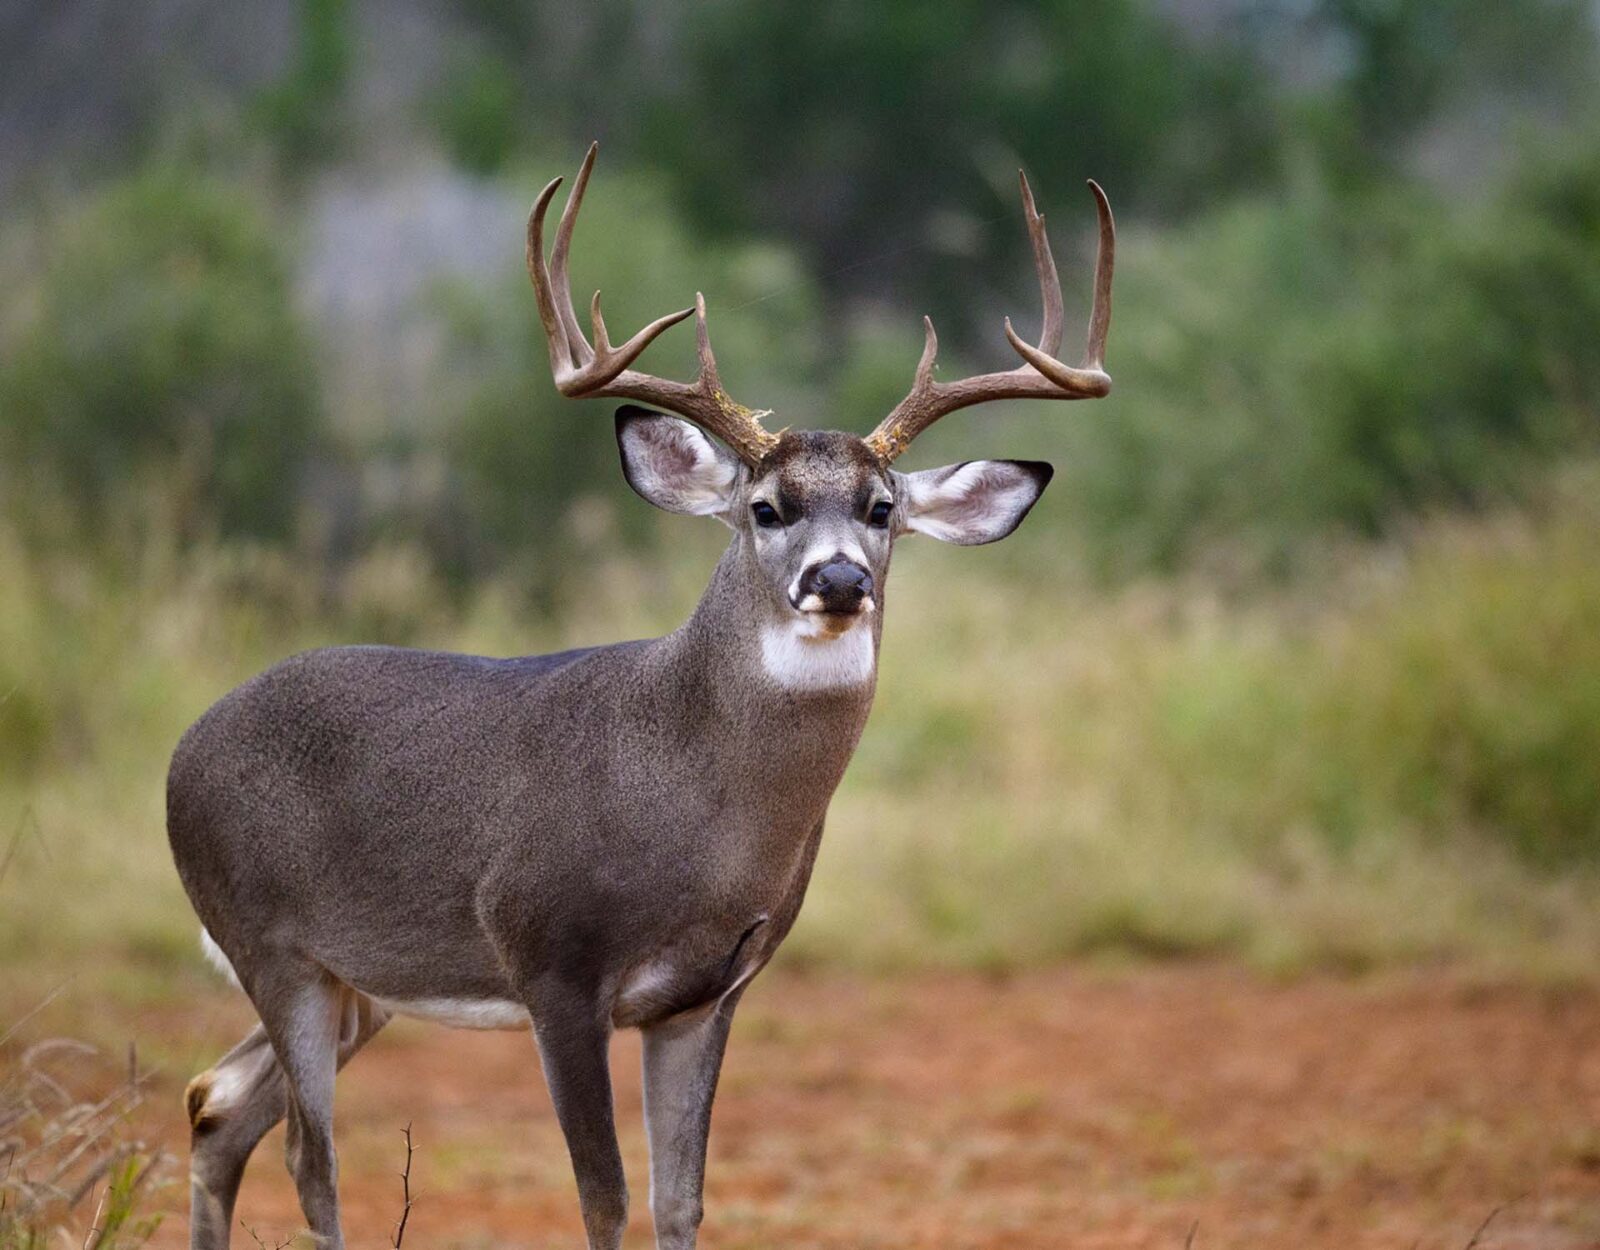 A face on image of a whitetail deer buck.